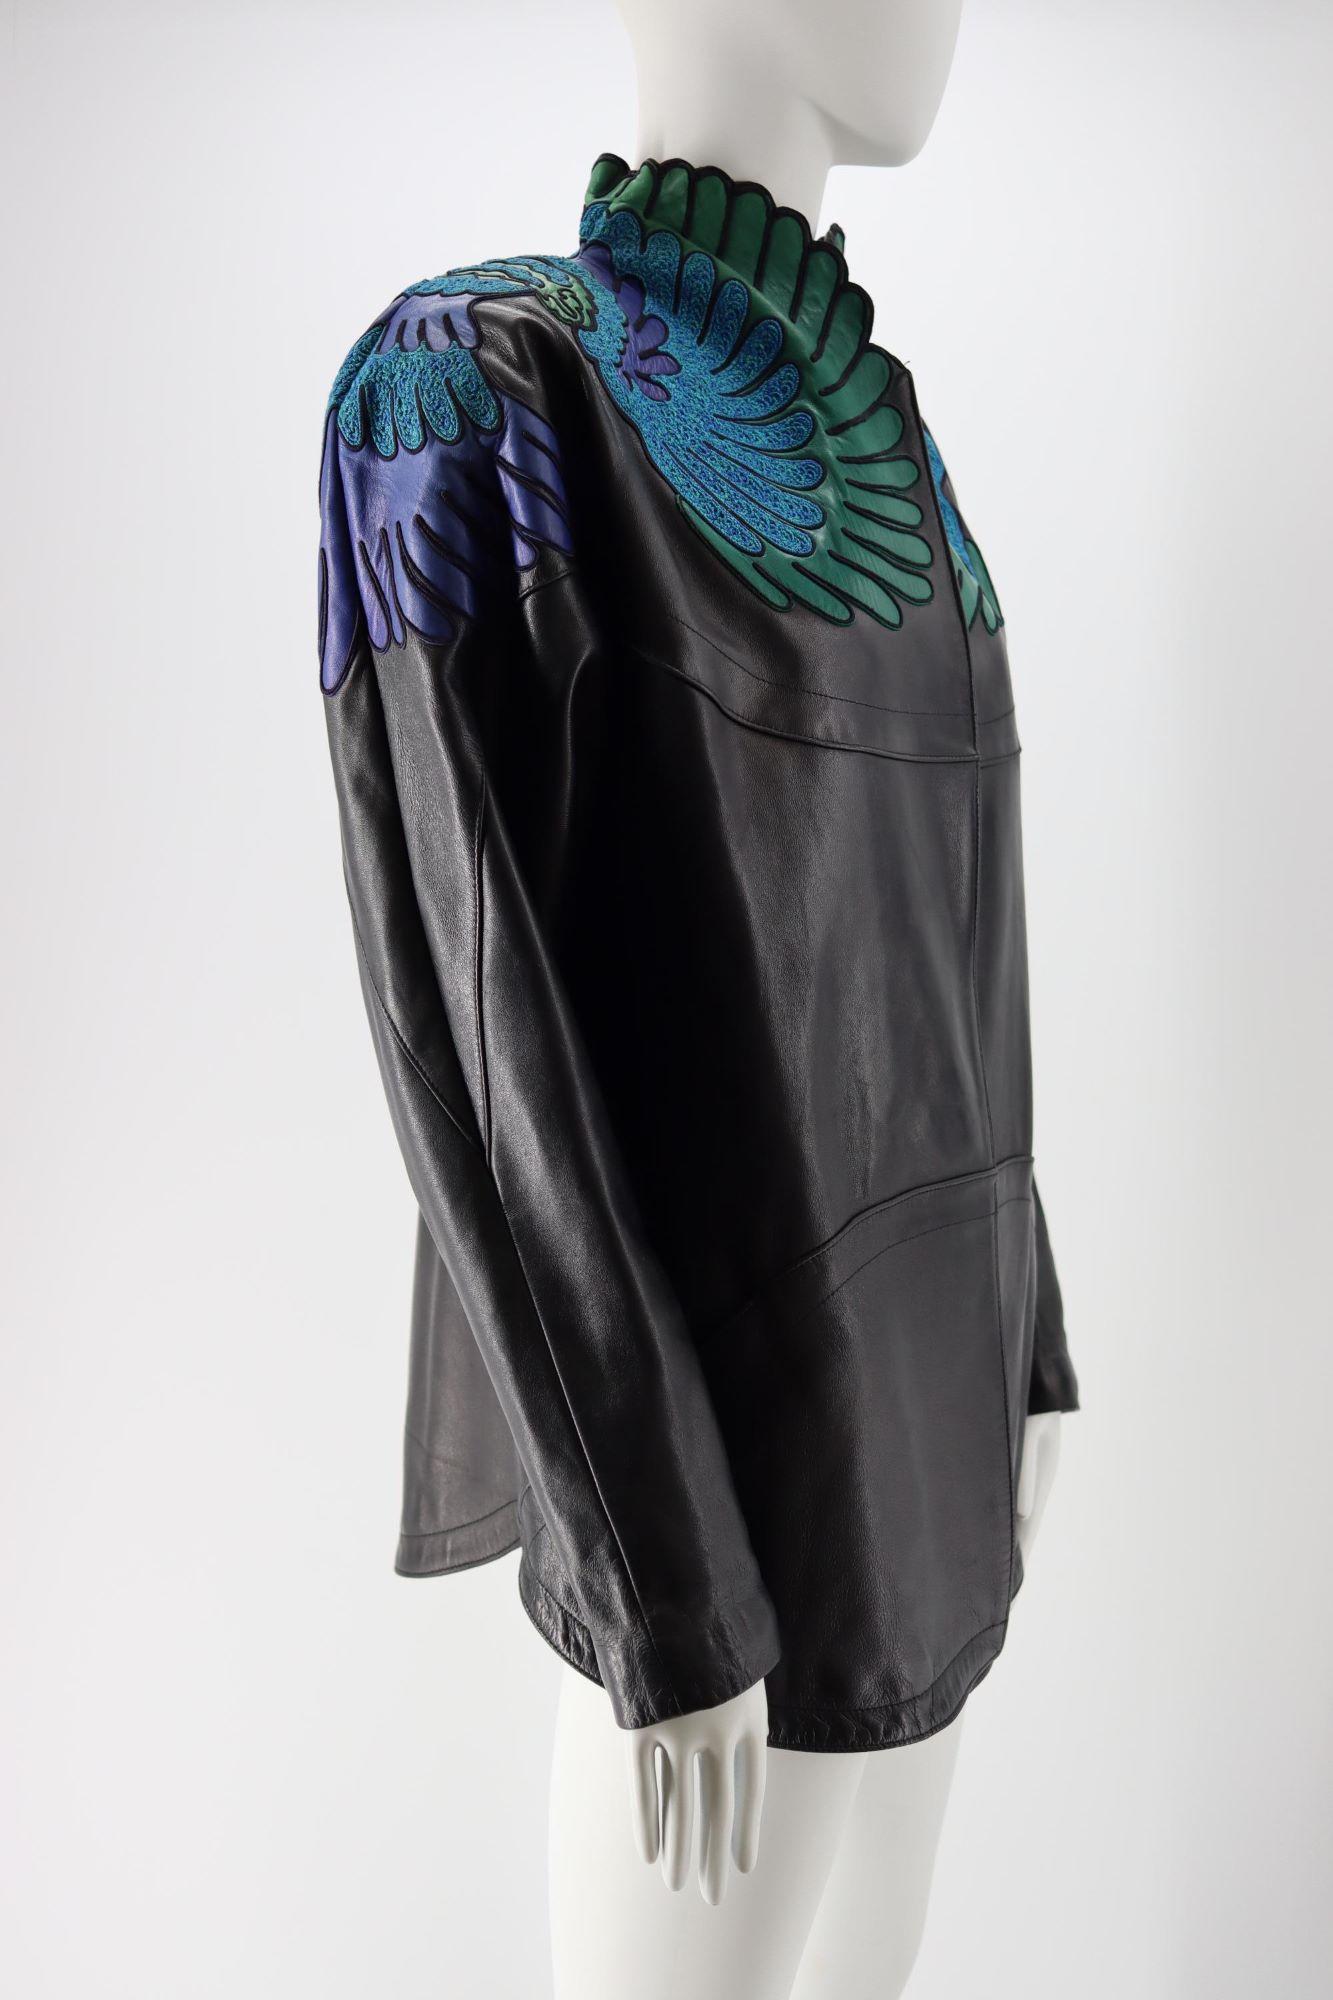 - Jean Claude Jitrois Leather Jacket
- Two pockets at the front
- Floral-esque embroideries in blue with purple, gree and blue leather
- Lining 100% acetate
- Logo embroidered at the back in blue
- Raglan sleeves
- Good condition, shows some light